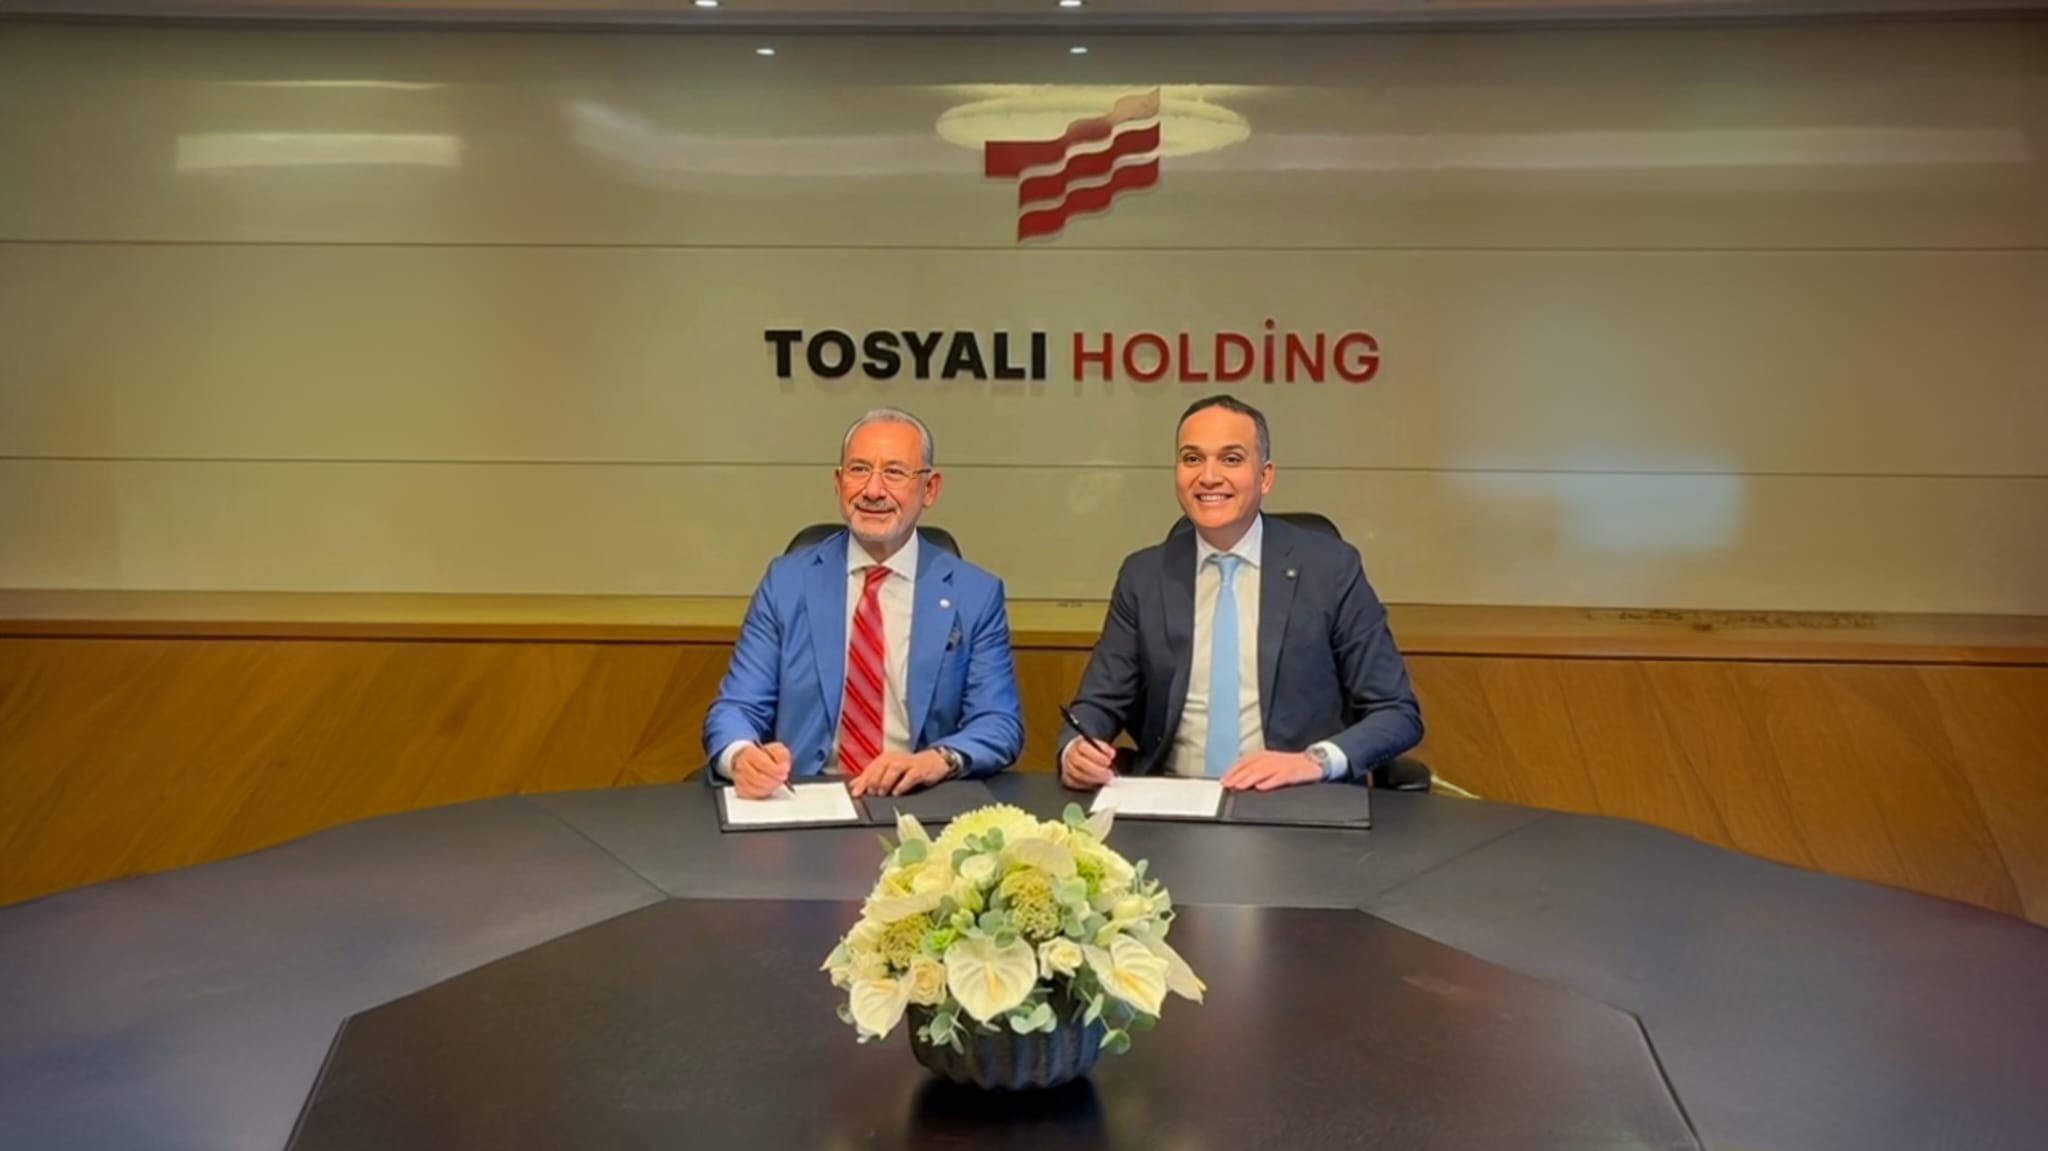 Tosyalı SULB Started Investing in the World’s Largest DRI Complex